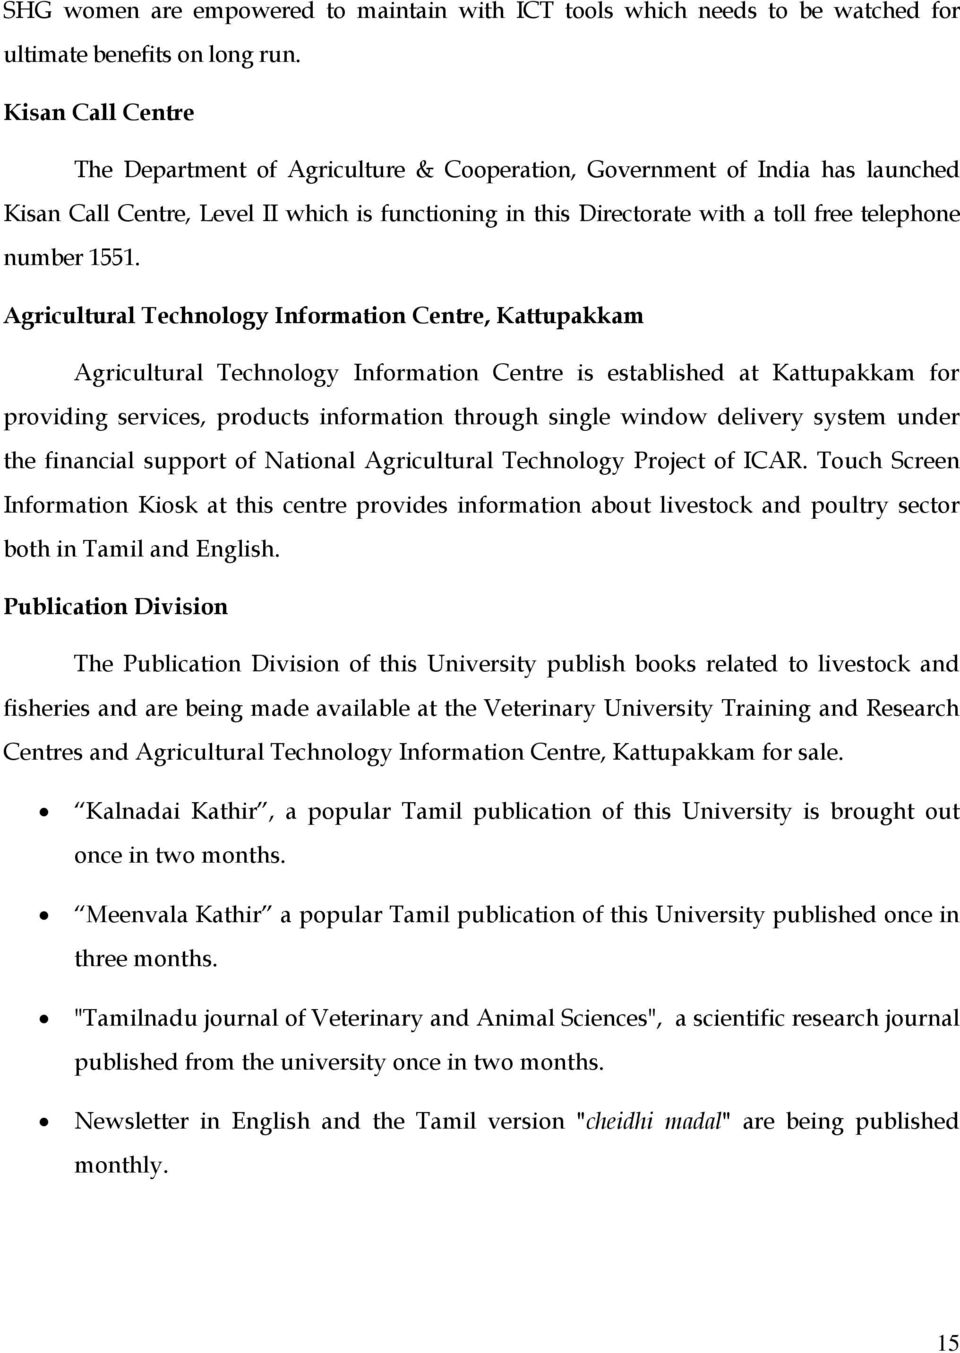 TAMIL NADU VETERINARY AND ANIMAL SCIENCES UNIVERSITY PRO-ACTIVE DISCLOSURES  UNDER RIGHT TO INFORMATION ACT PDF Free Download